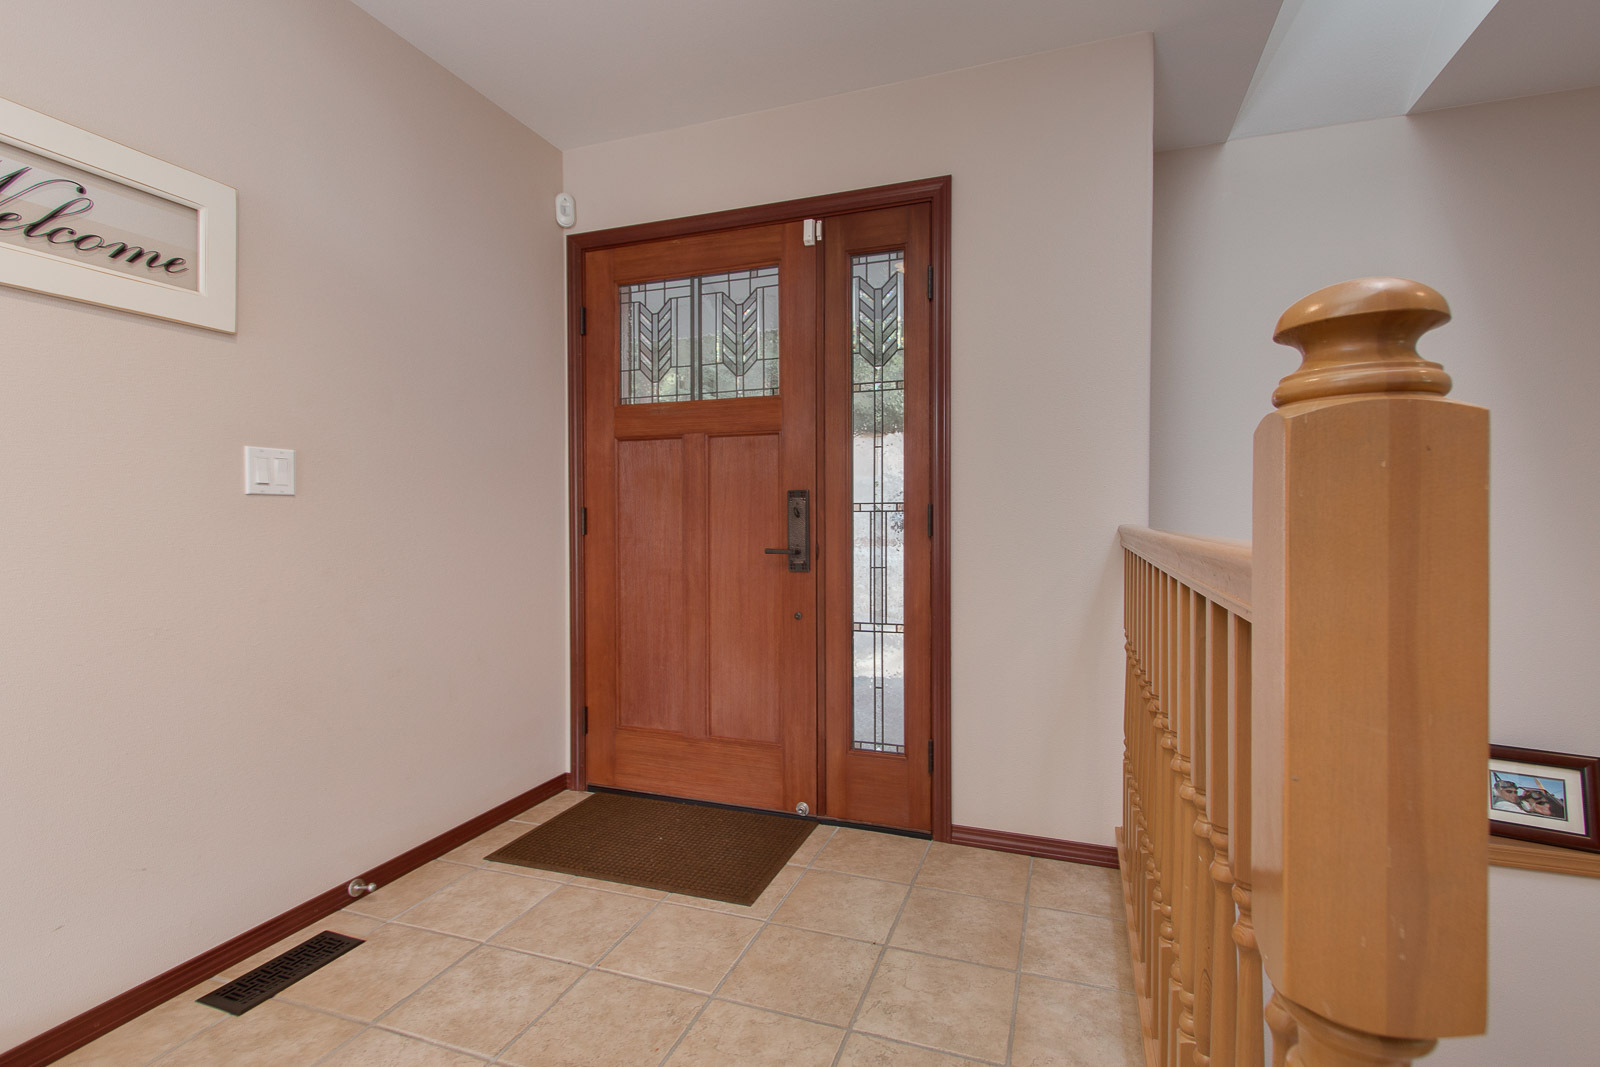 Property Photo: Interior of home 20226 83rd Ave W  WA 98026 